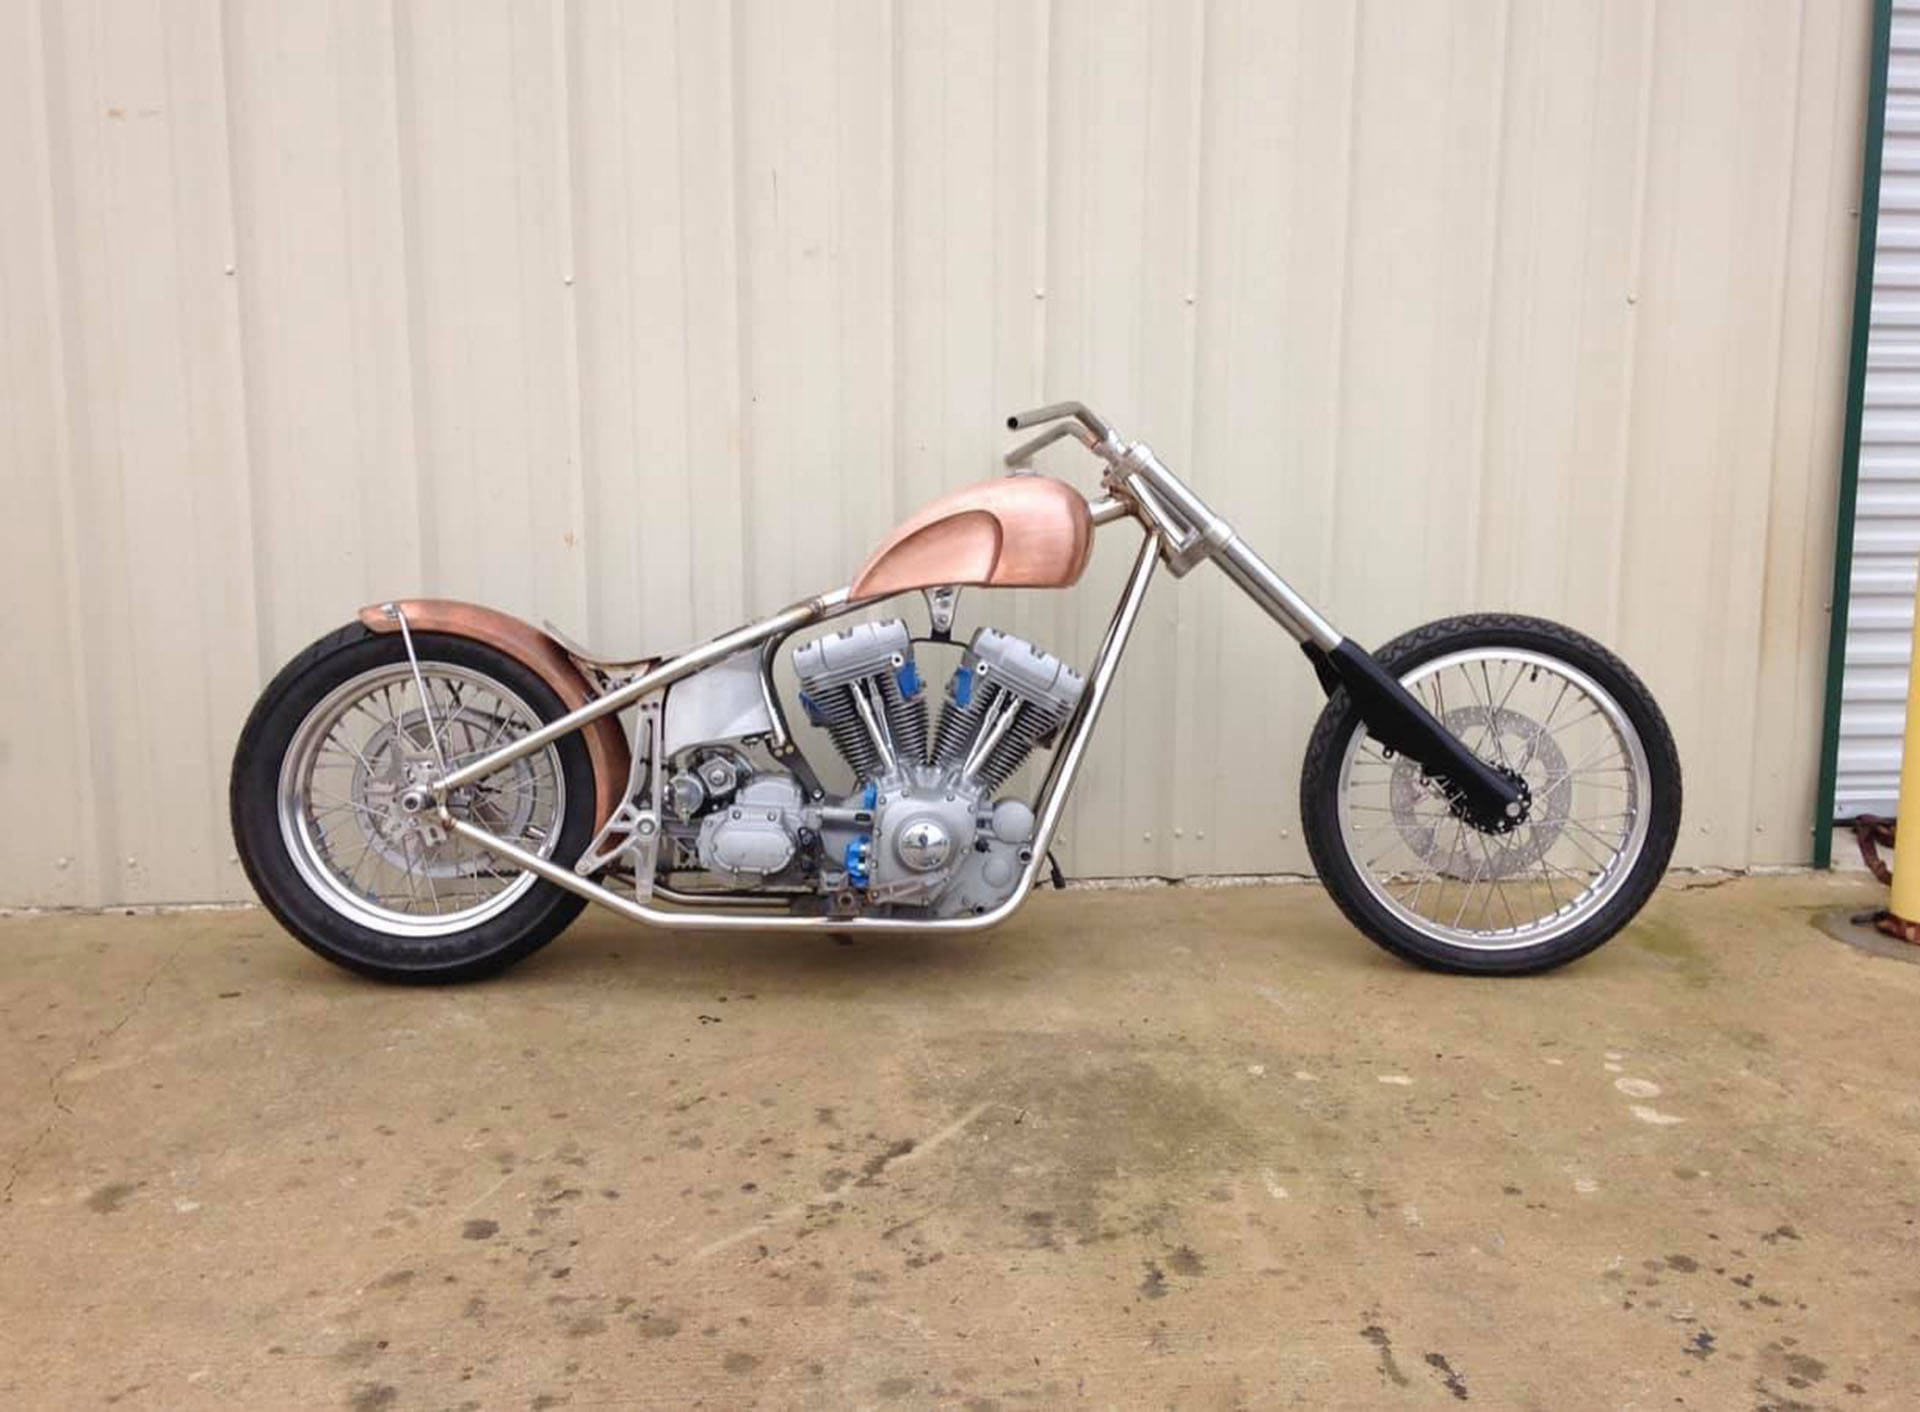 West Coast Choppers Bobber Motorcycle Wallpaper